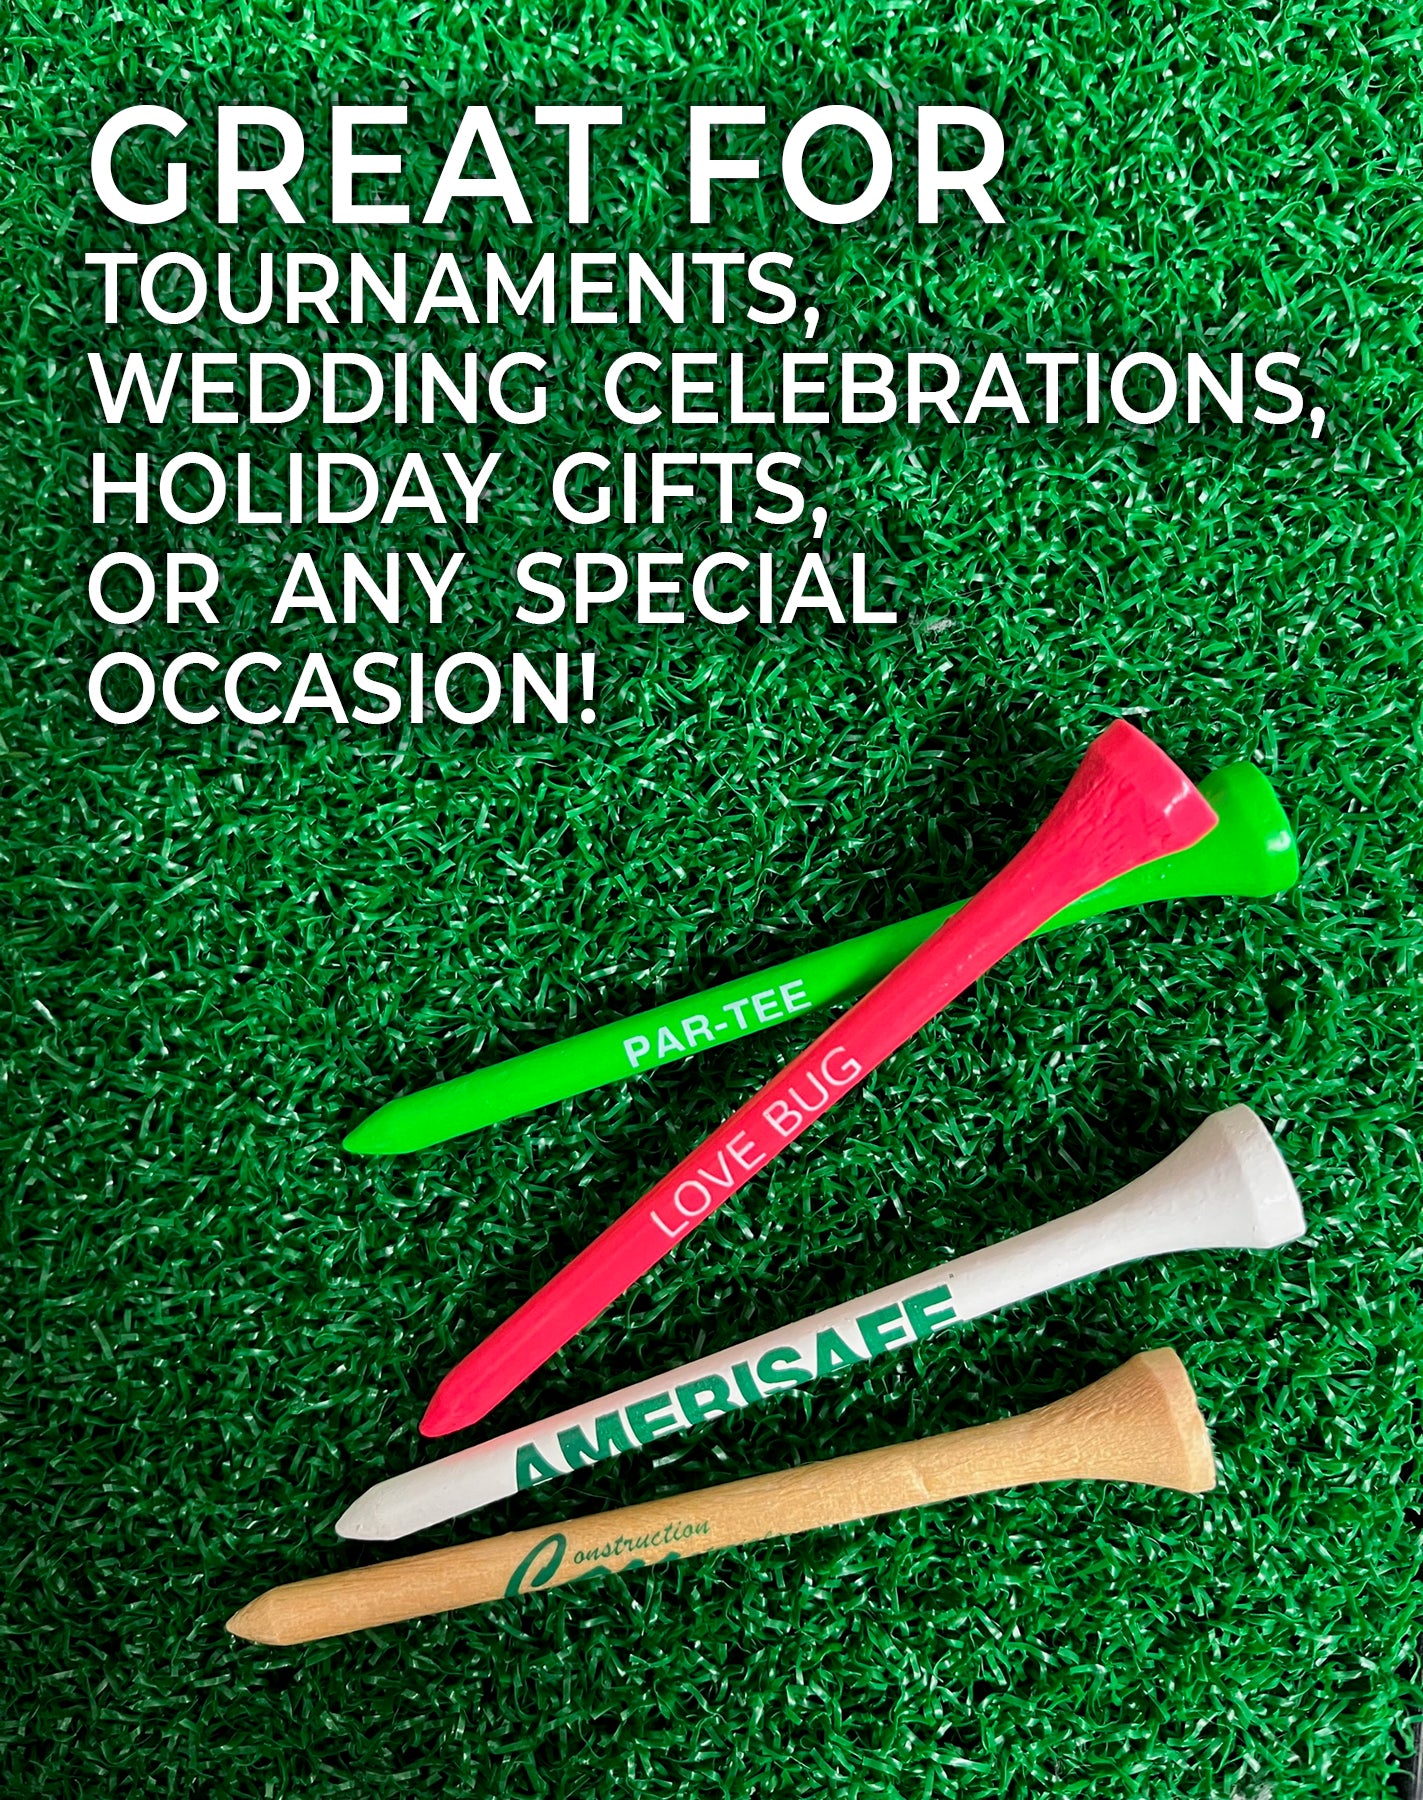 Personalized Combo Packs - 10 Golf Tees